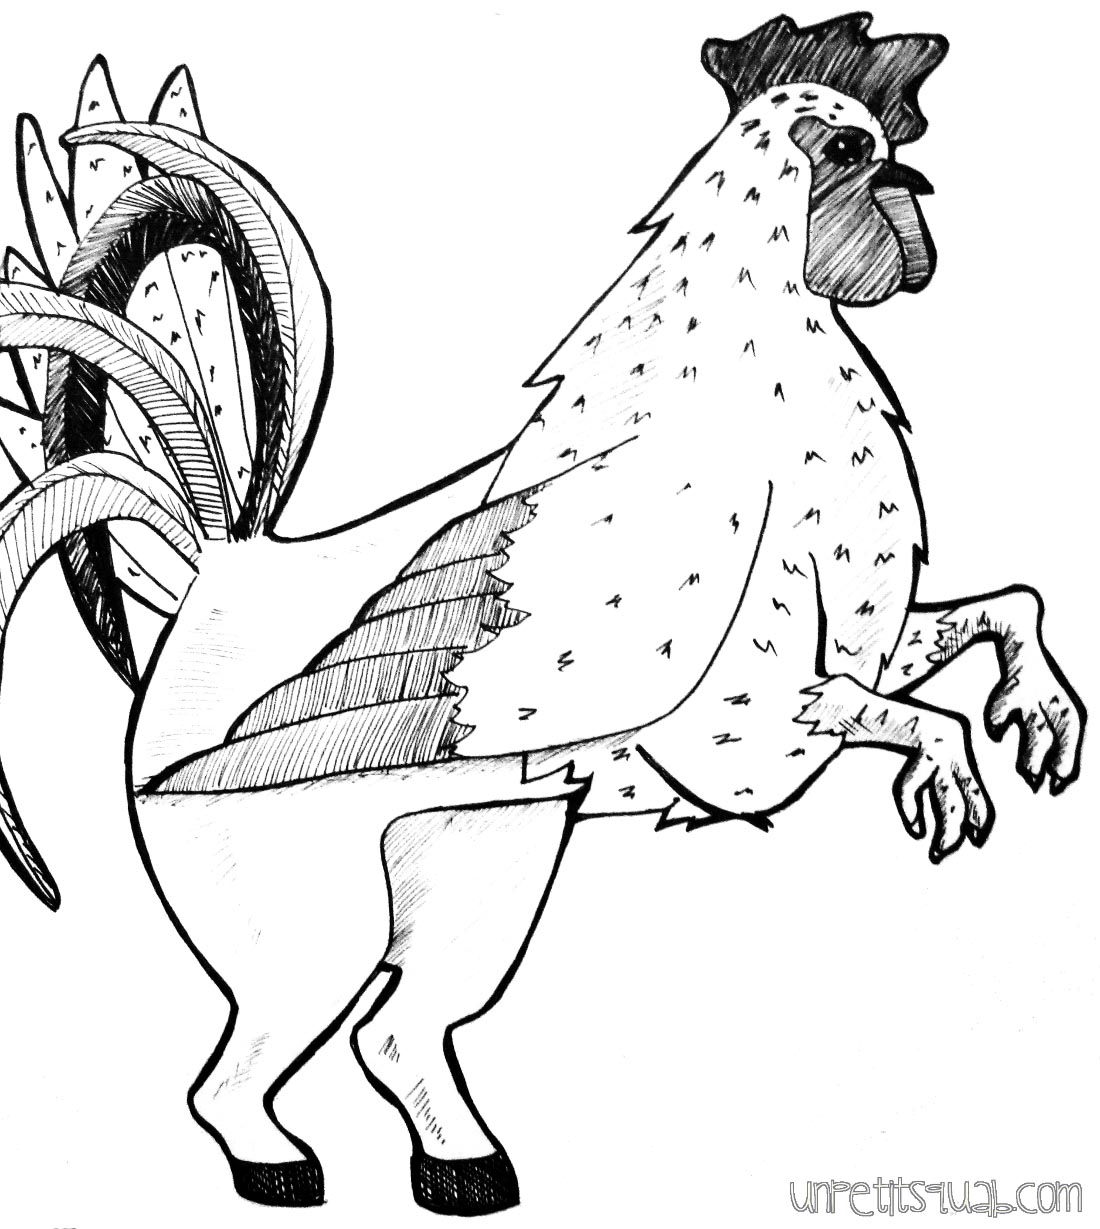 a line drawing of something resembling a hippogriff, but with the bird part as a chicken instead of an eagle